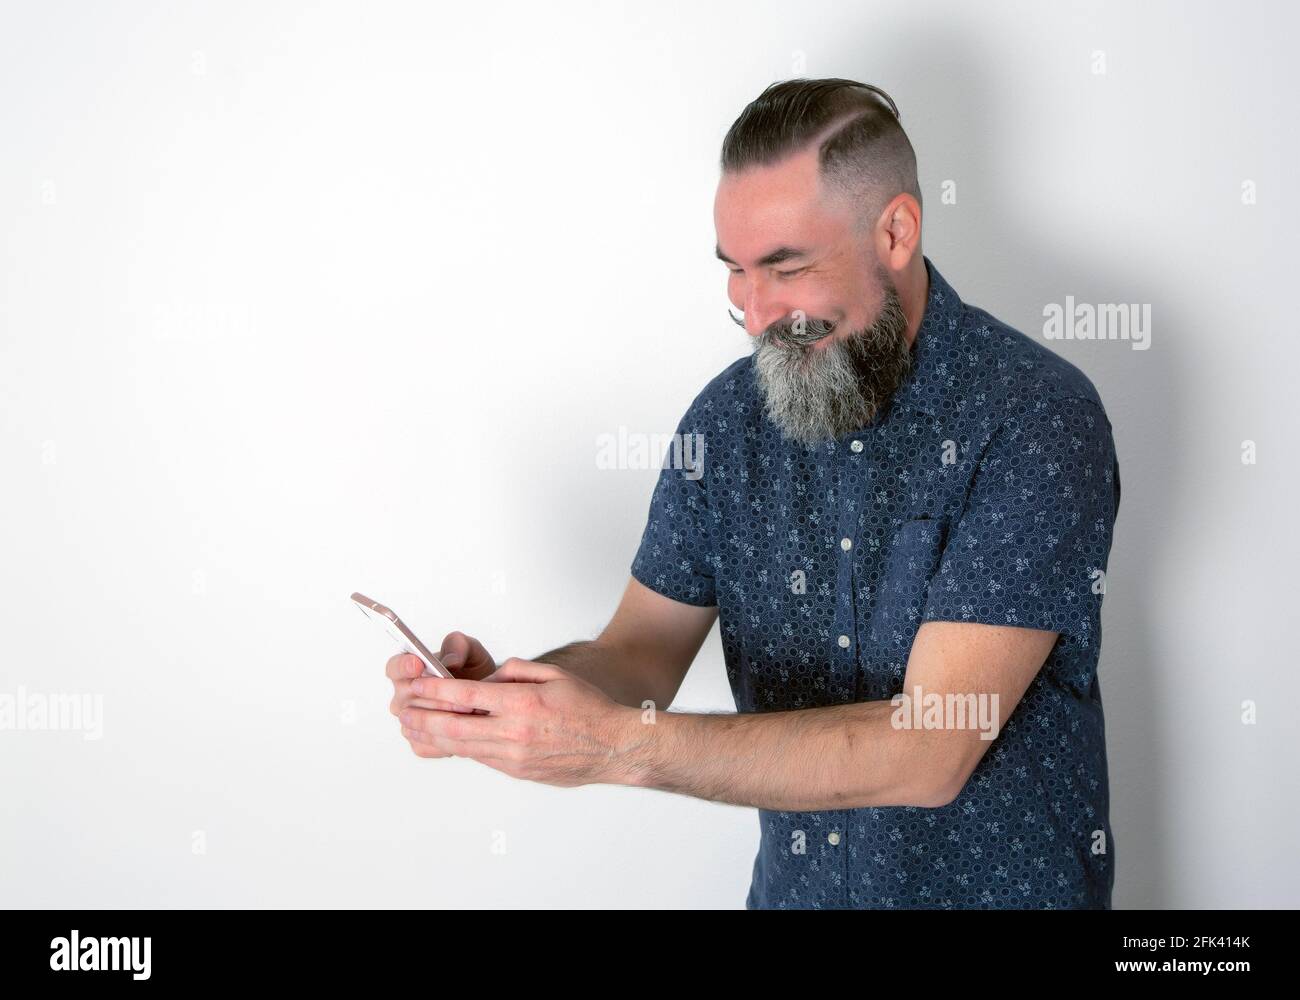 Caucasian 40-45 year old bearded hipster looking at his mobile phone with a happy and laughing face Stock Photo